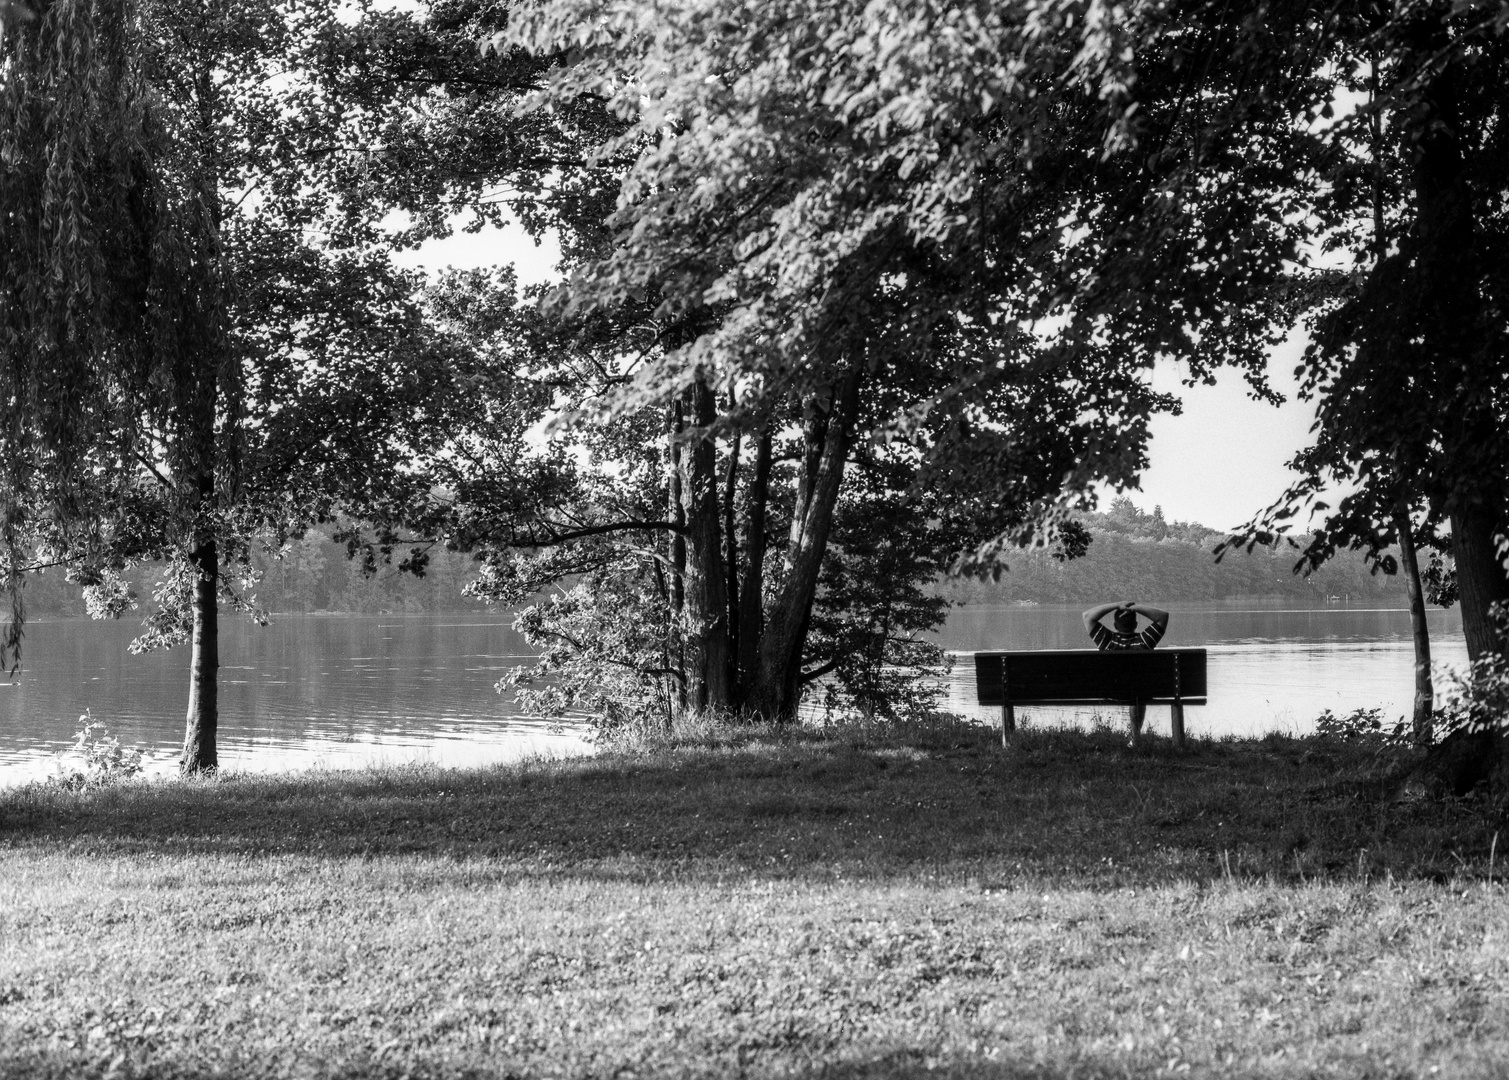 Man sitting on a bench by the lake